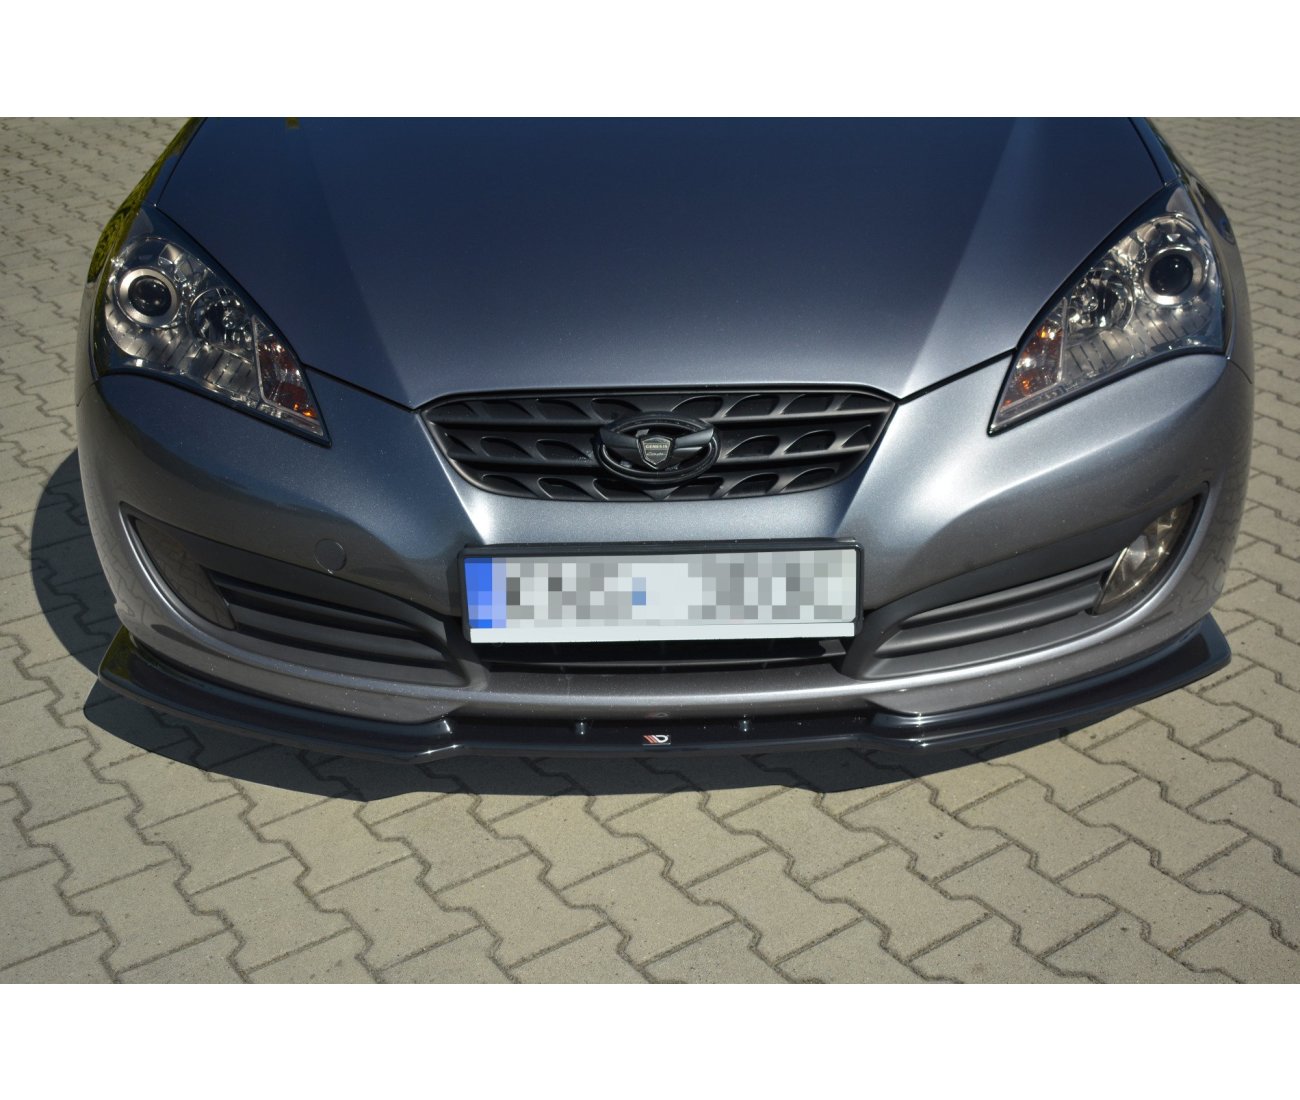 Cup spoiler lip front approach for Hyundai Genesis Coupe